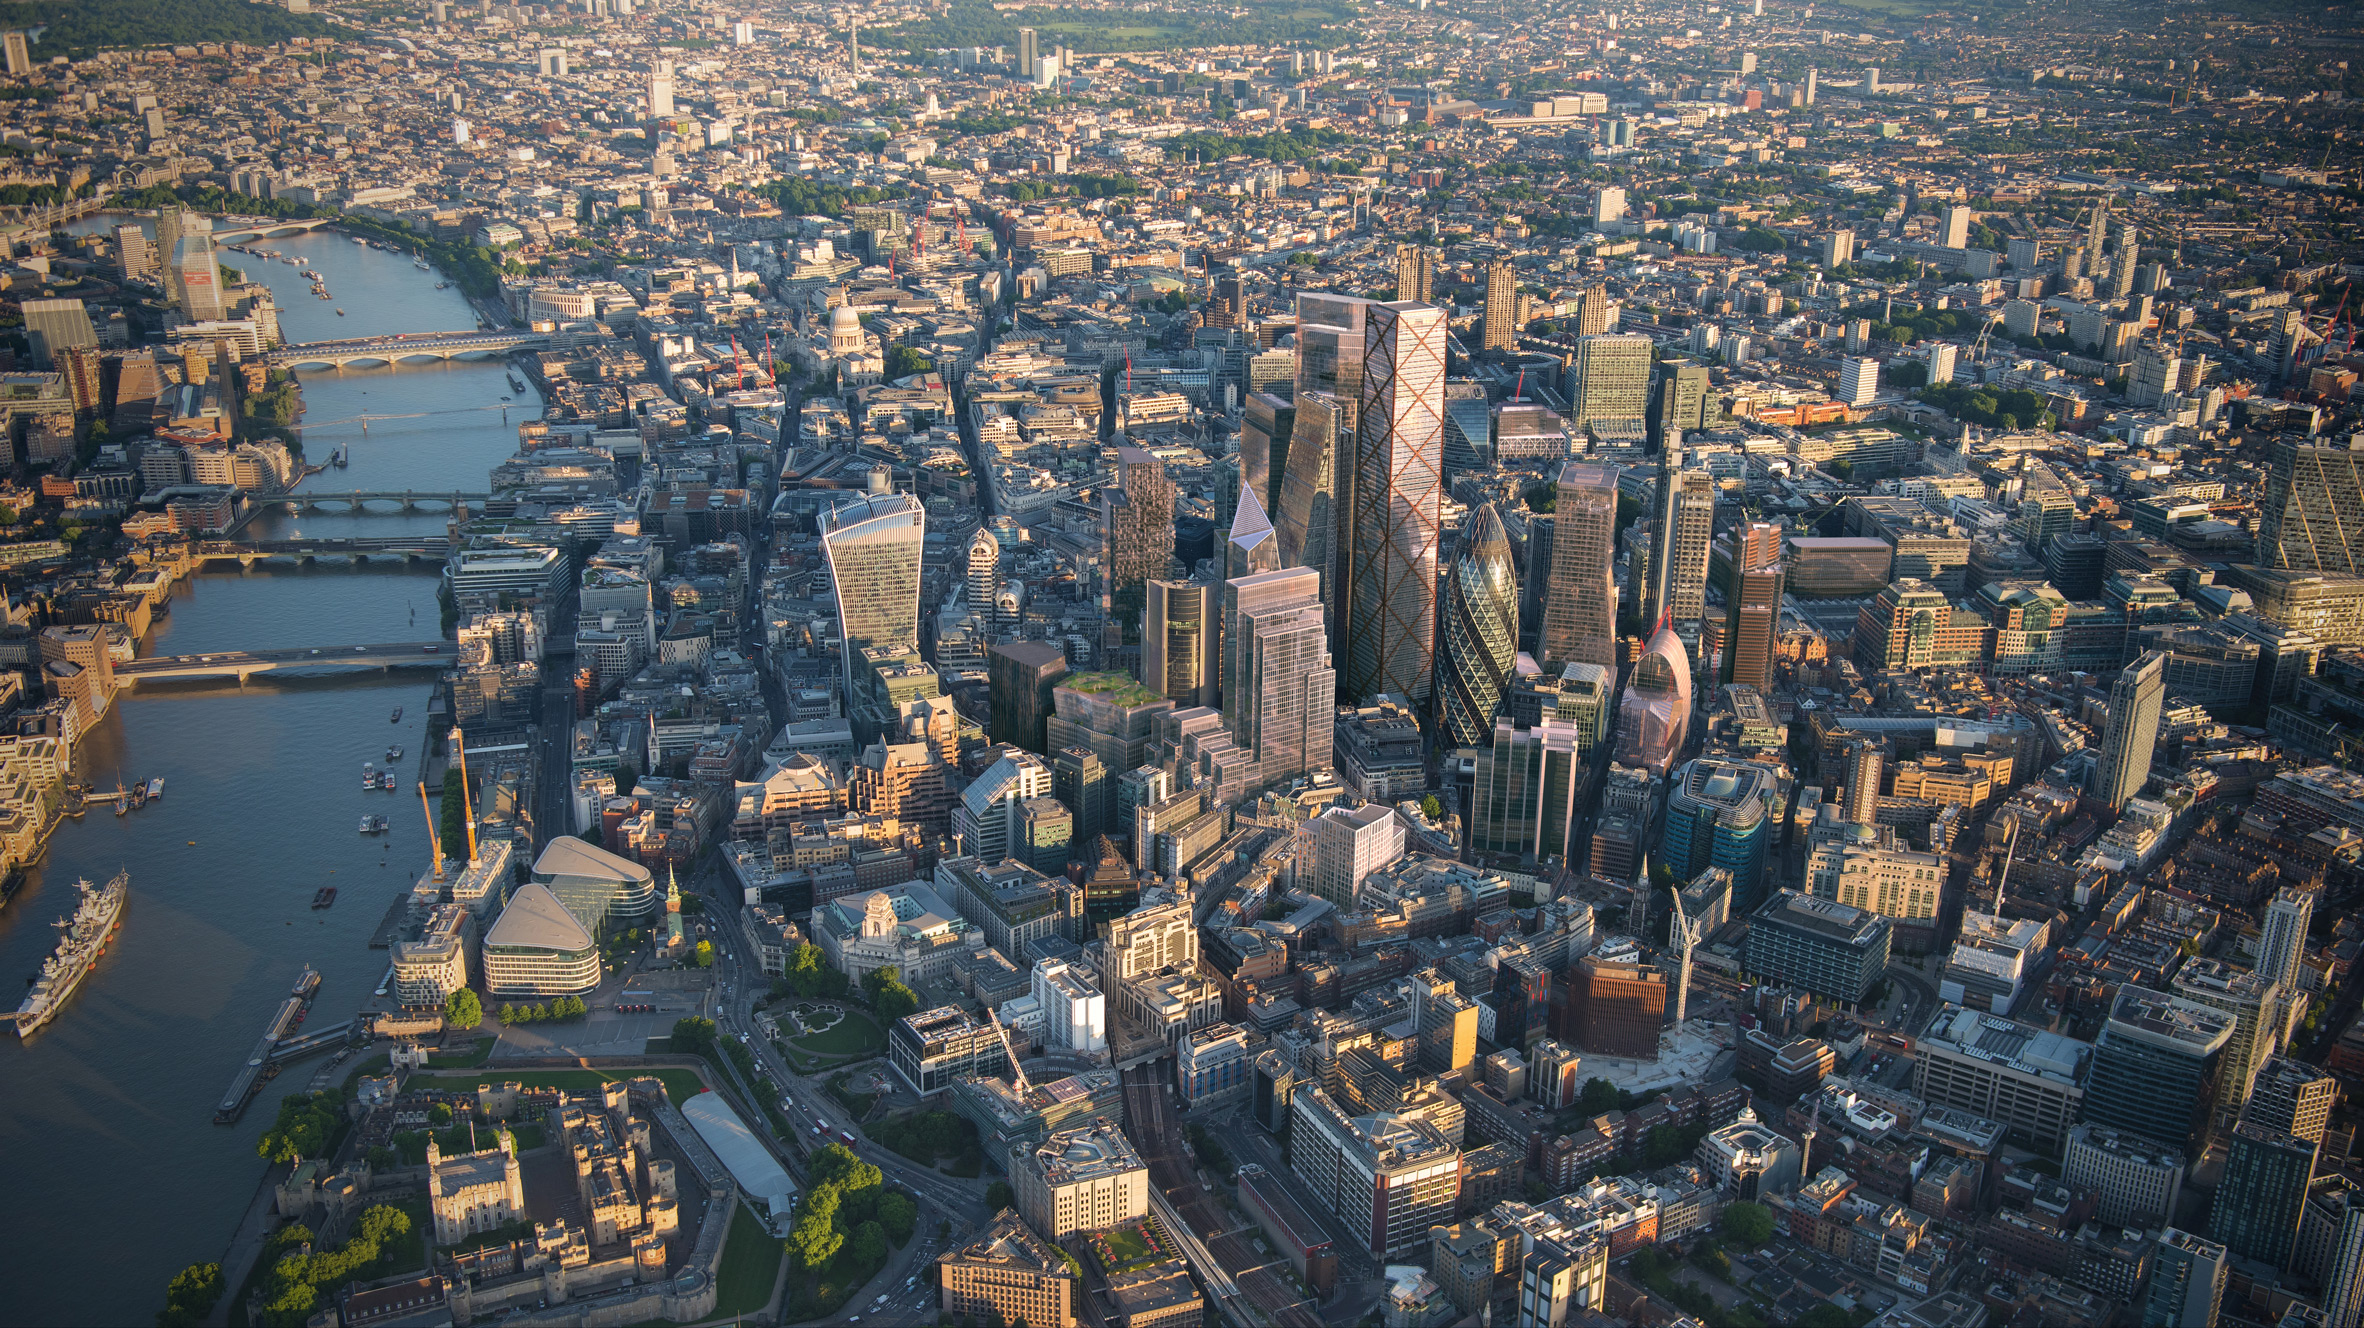 13 skyscrapers set to transform City of London skyline by 2026